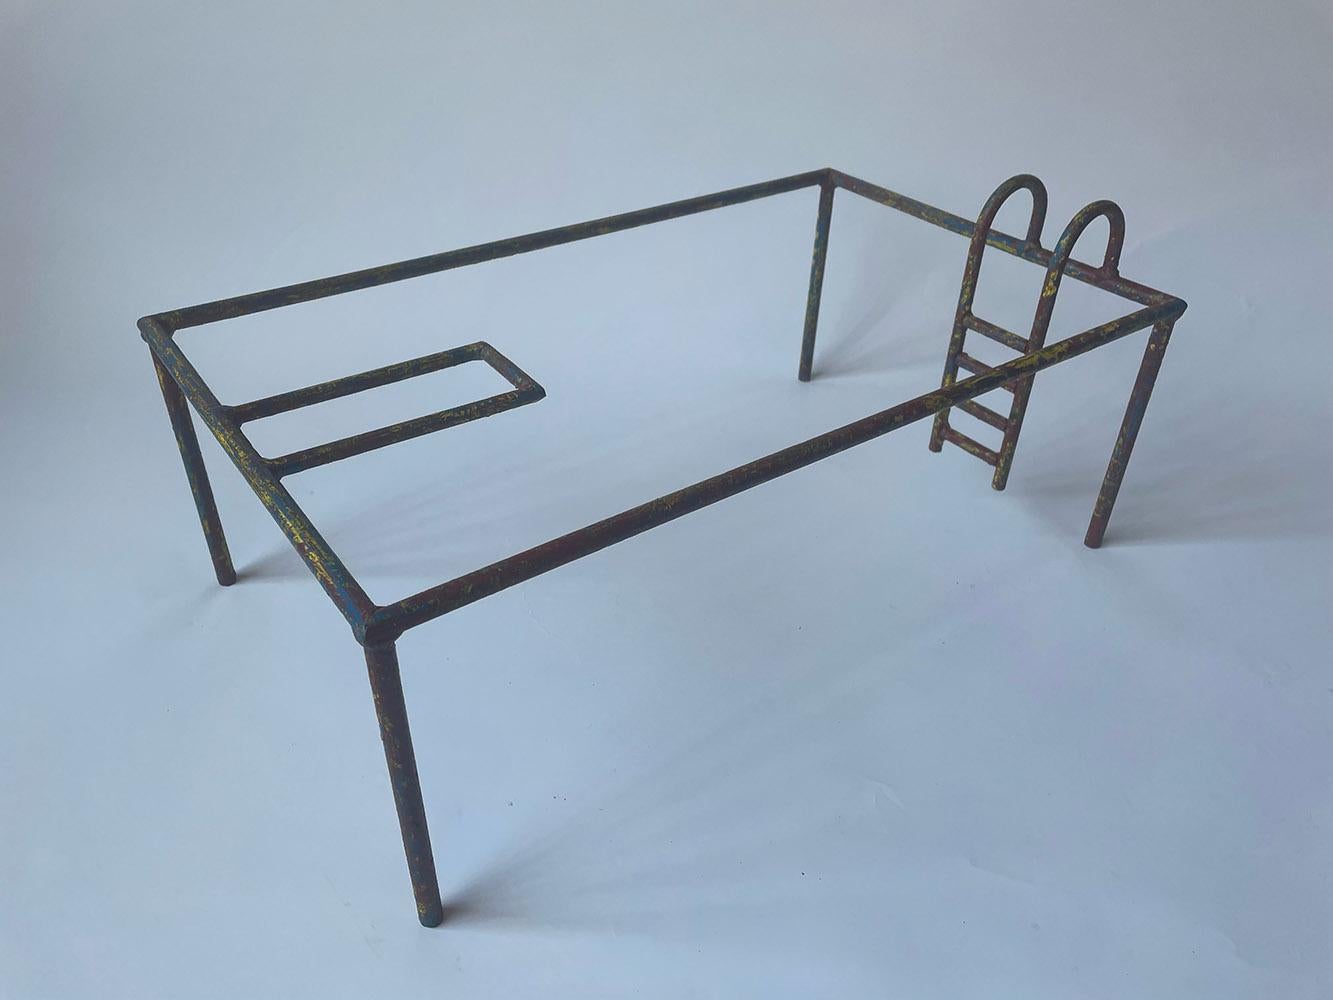 GRAND POOL by Ramon Enrich - minimalist iron sculpture, pool, unique work For Sale 1